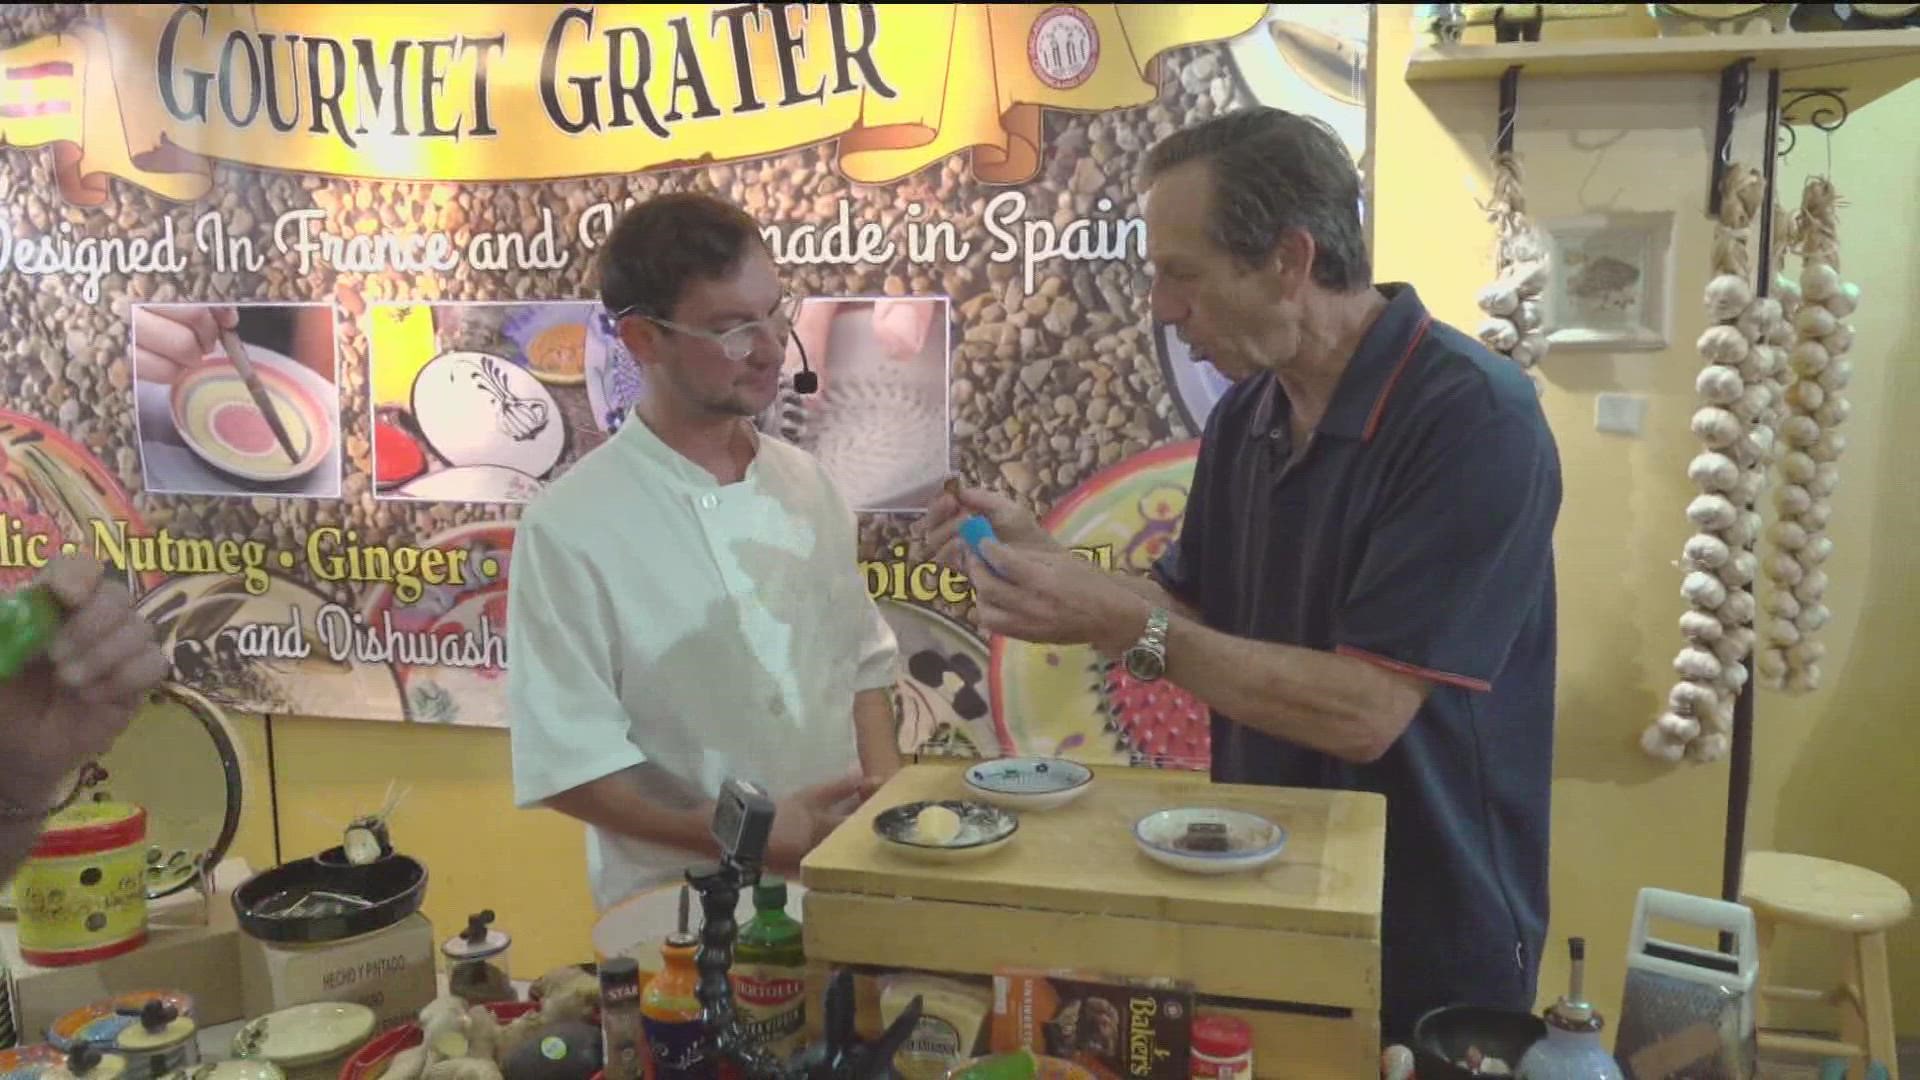 CBS 8's Shawn Styles checks out the latest kitchen gadgets at the San Diego County Fair